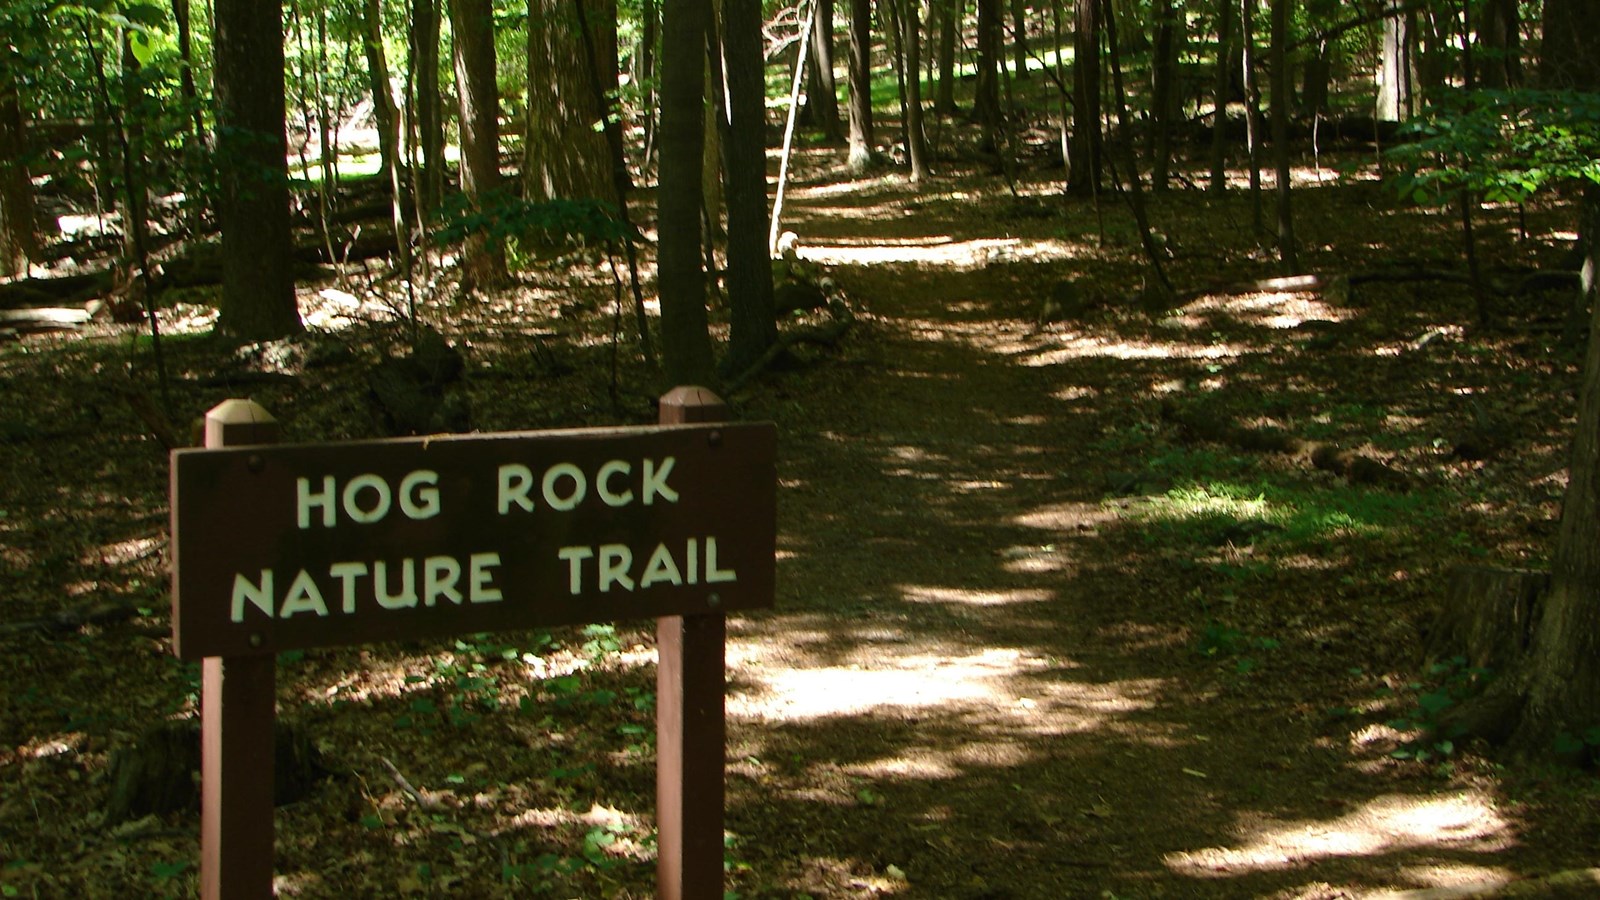 A brown, wooden sign alongside a forested dirt trail.